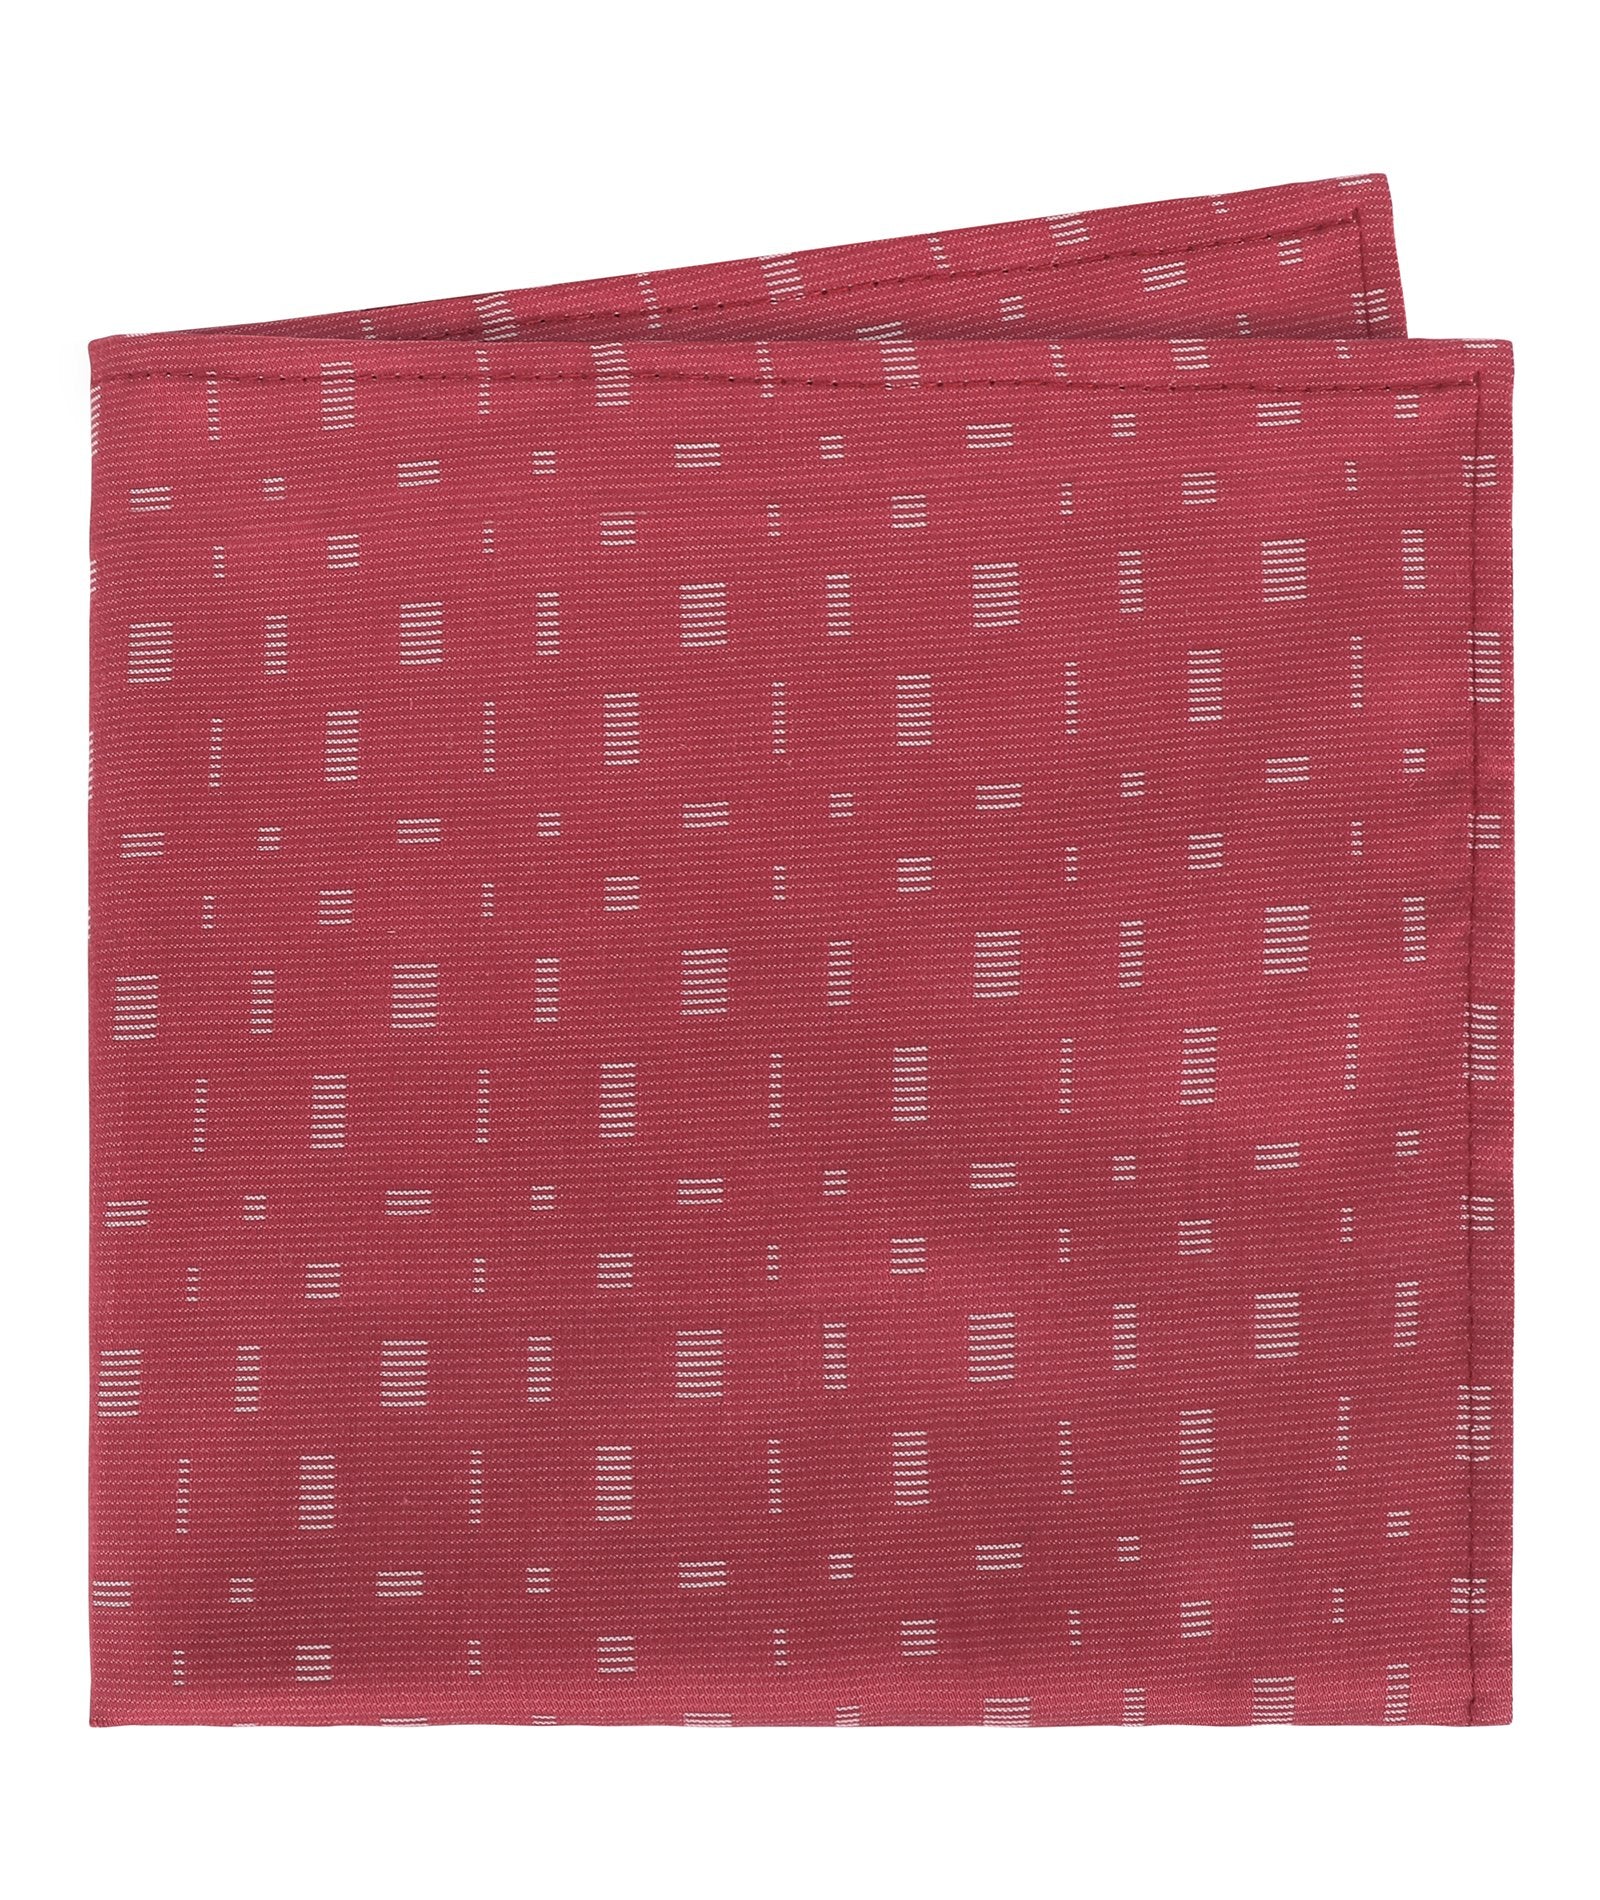 Red With White Woven Rectangles Pocket Square